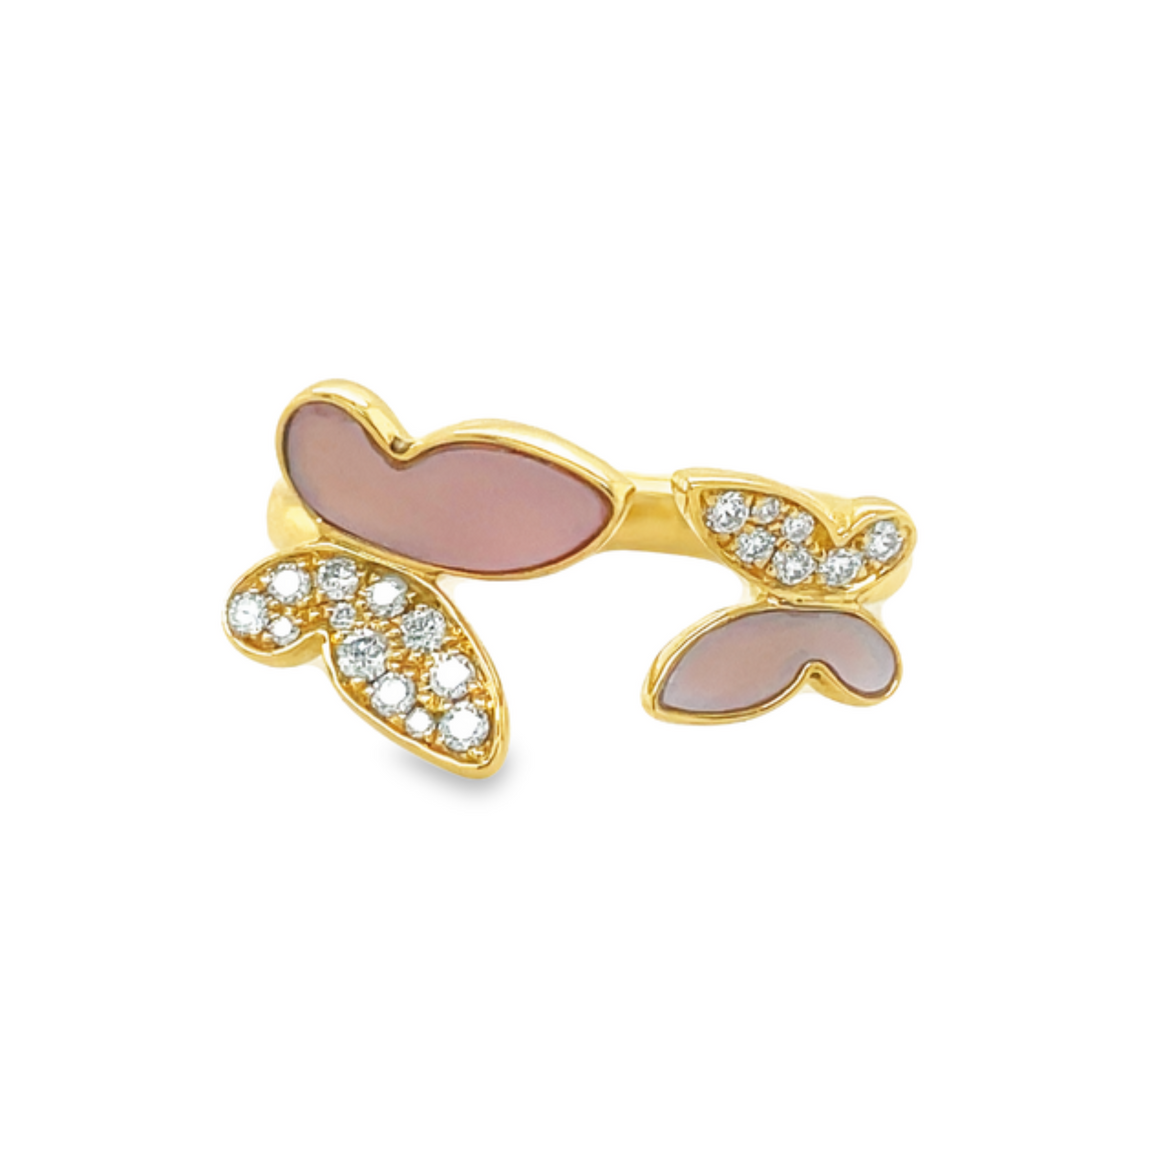 18kt yellow gold butterfly ring.  0.39 cts round diamonds   MOP  Open ring style  Large & medium butterflies   10.00 mm x 7.00 mm    High quality diamonds   Size 6 (sizeable)